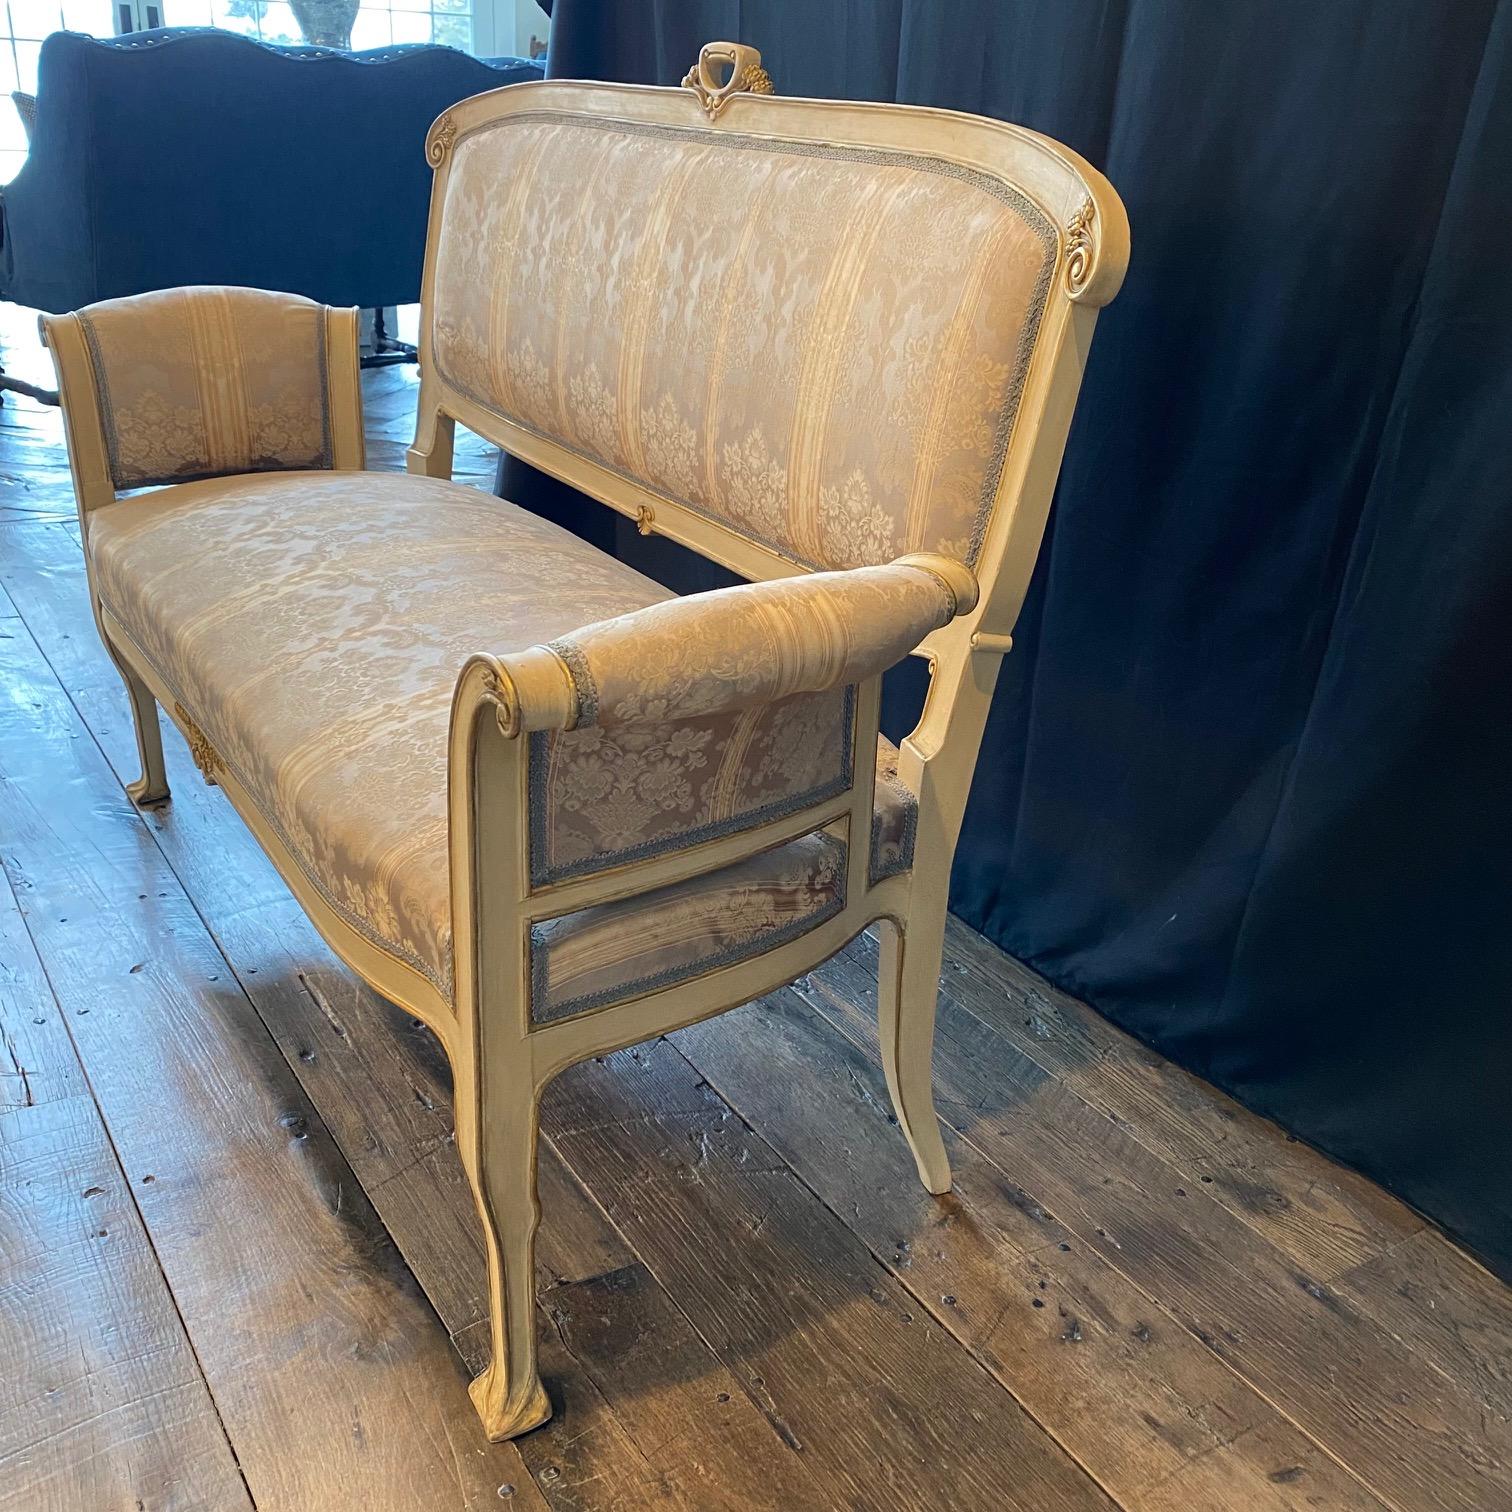 Lovely and elegant Art Nouveau Italian sofa, loveseat or settee painted neutral off white and gold, with beautiful original muted striped damask fabric. Can be sold separately; part of a 10-piece early 20th century Art Nouveau complete original